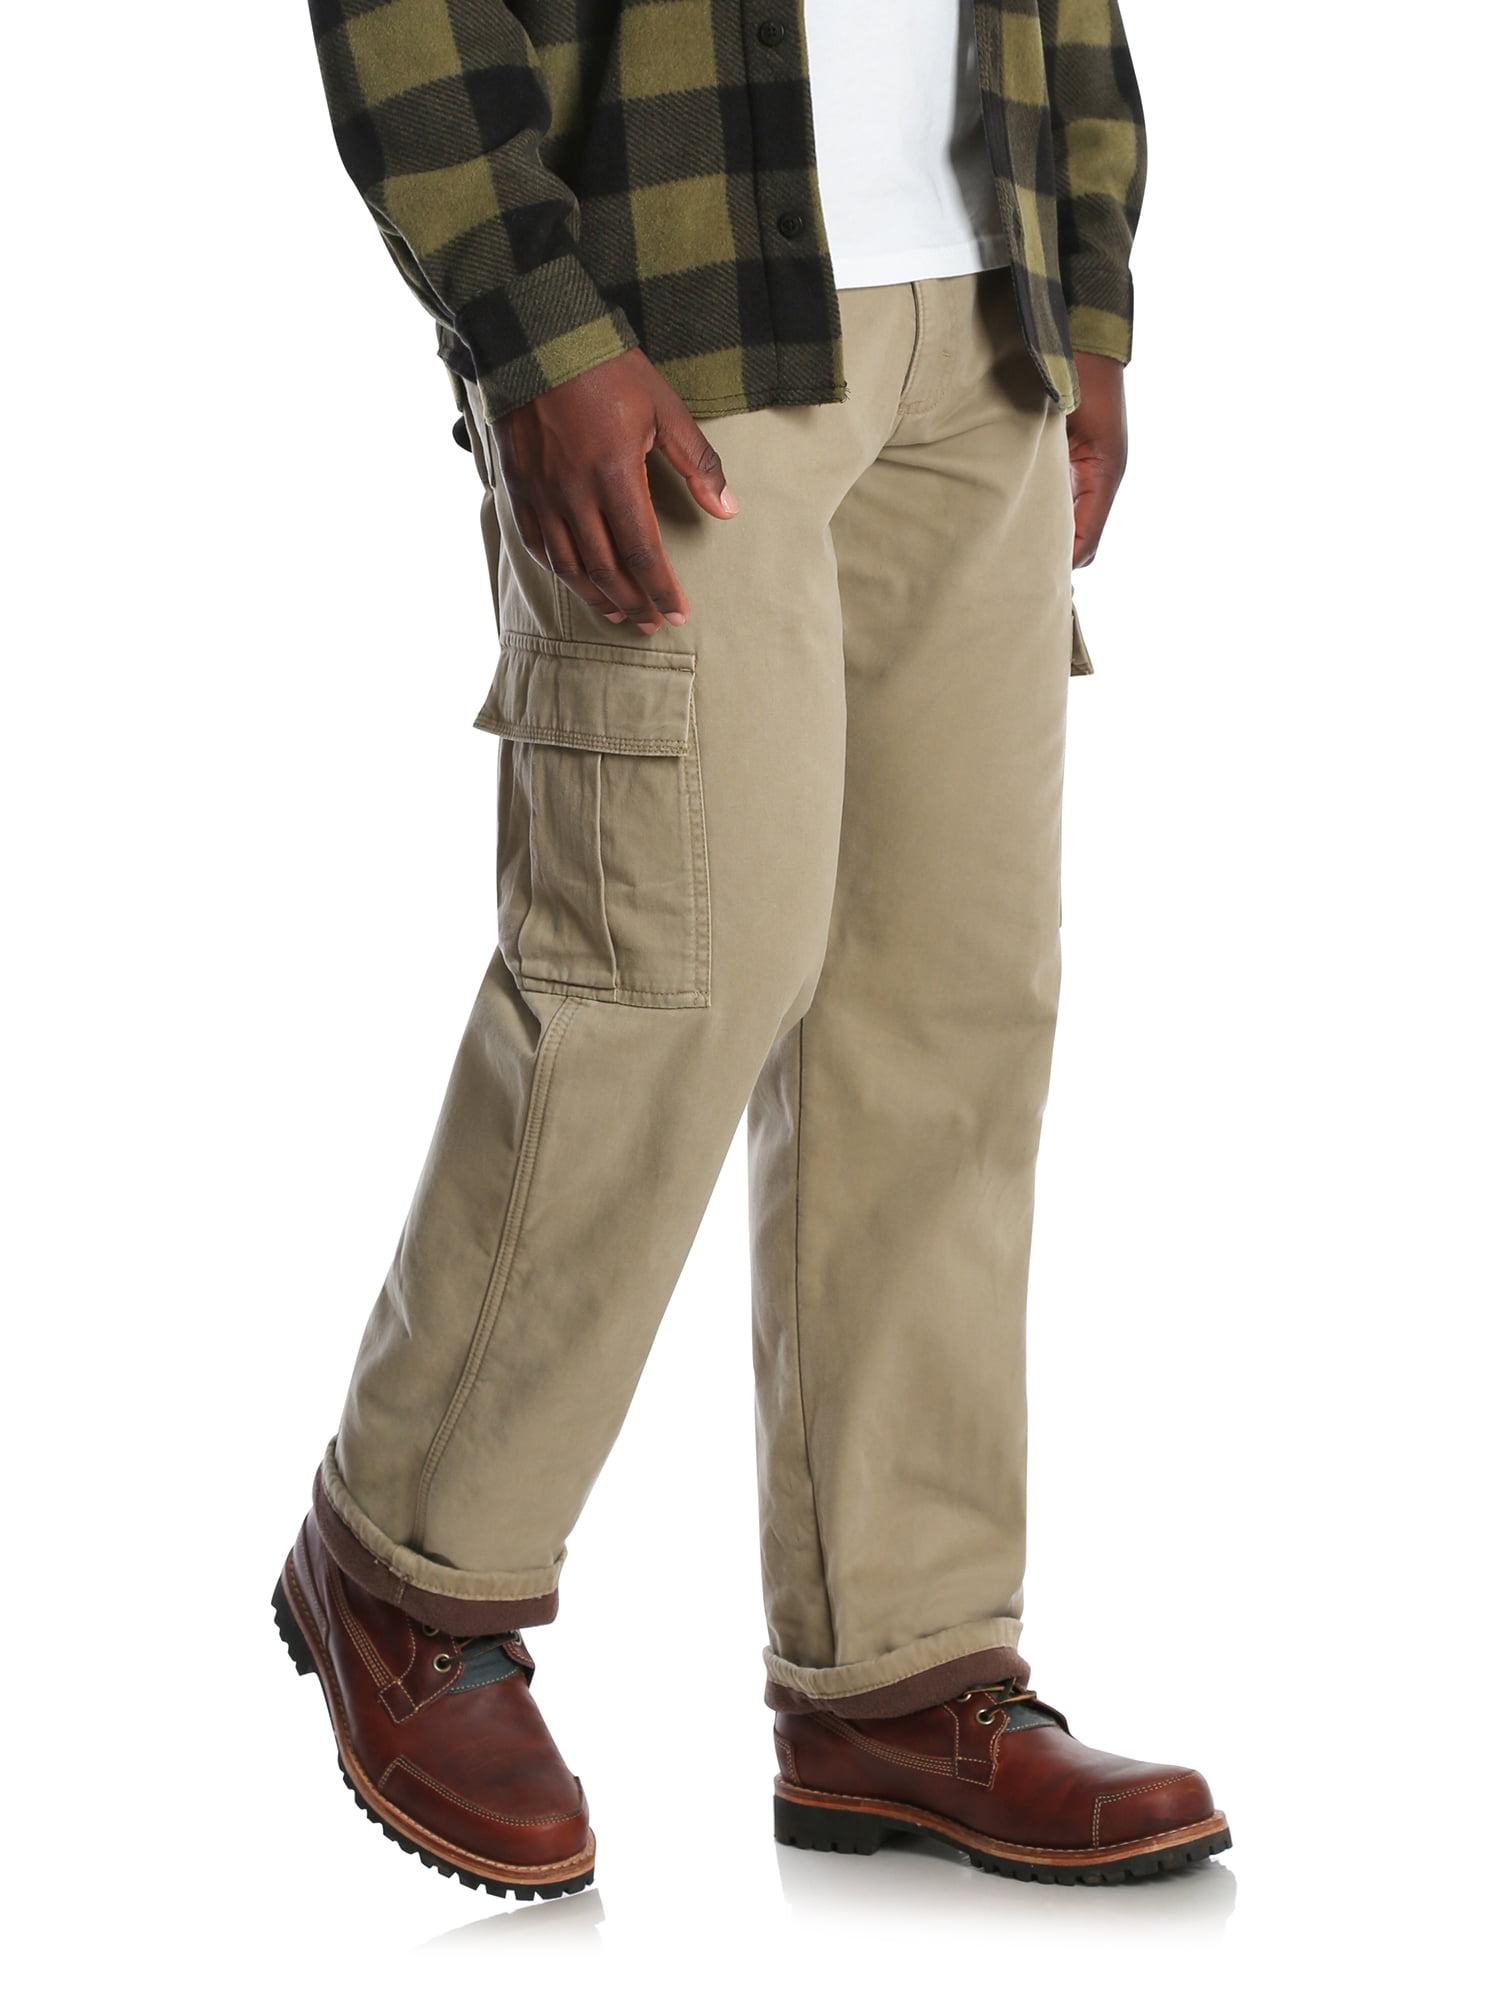 Carhartt Workwear 105491 Cargo Fleece Lined WorkWalking Trouser  Ripstop  material  Clothing from MI Supplies Limited UK